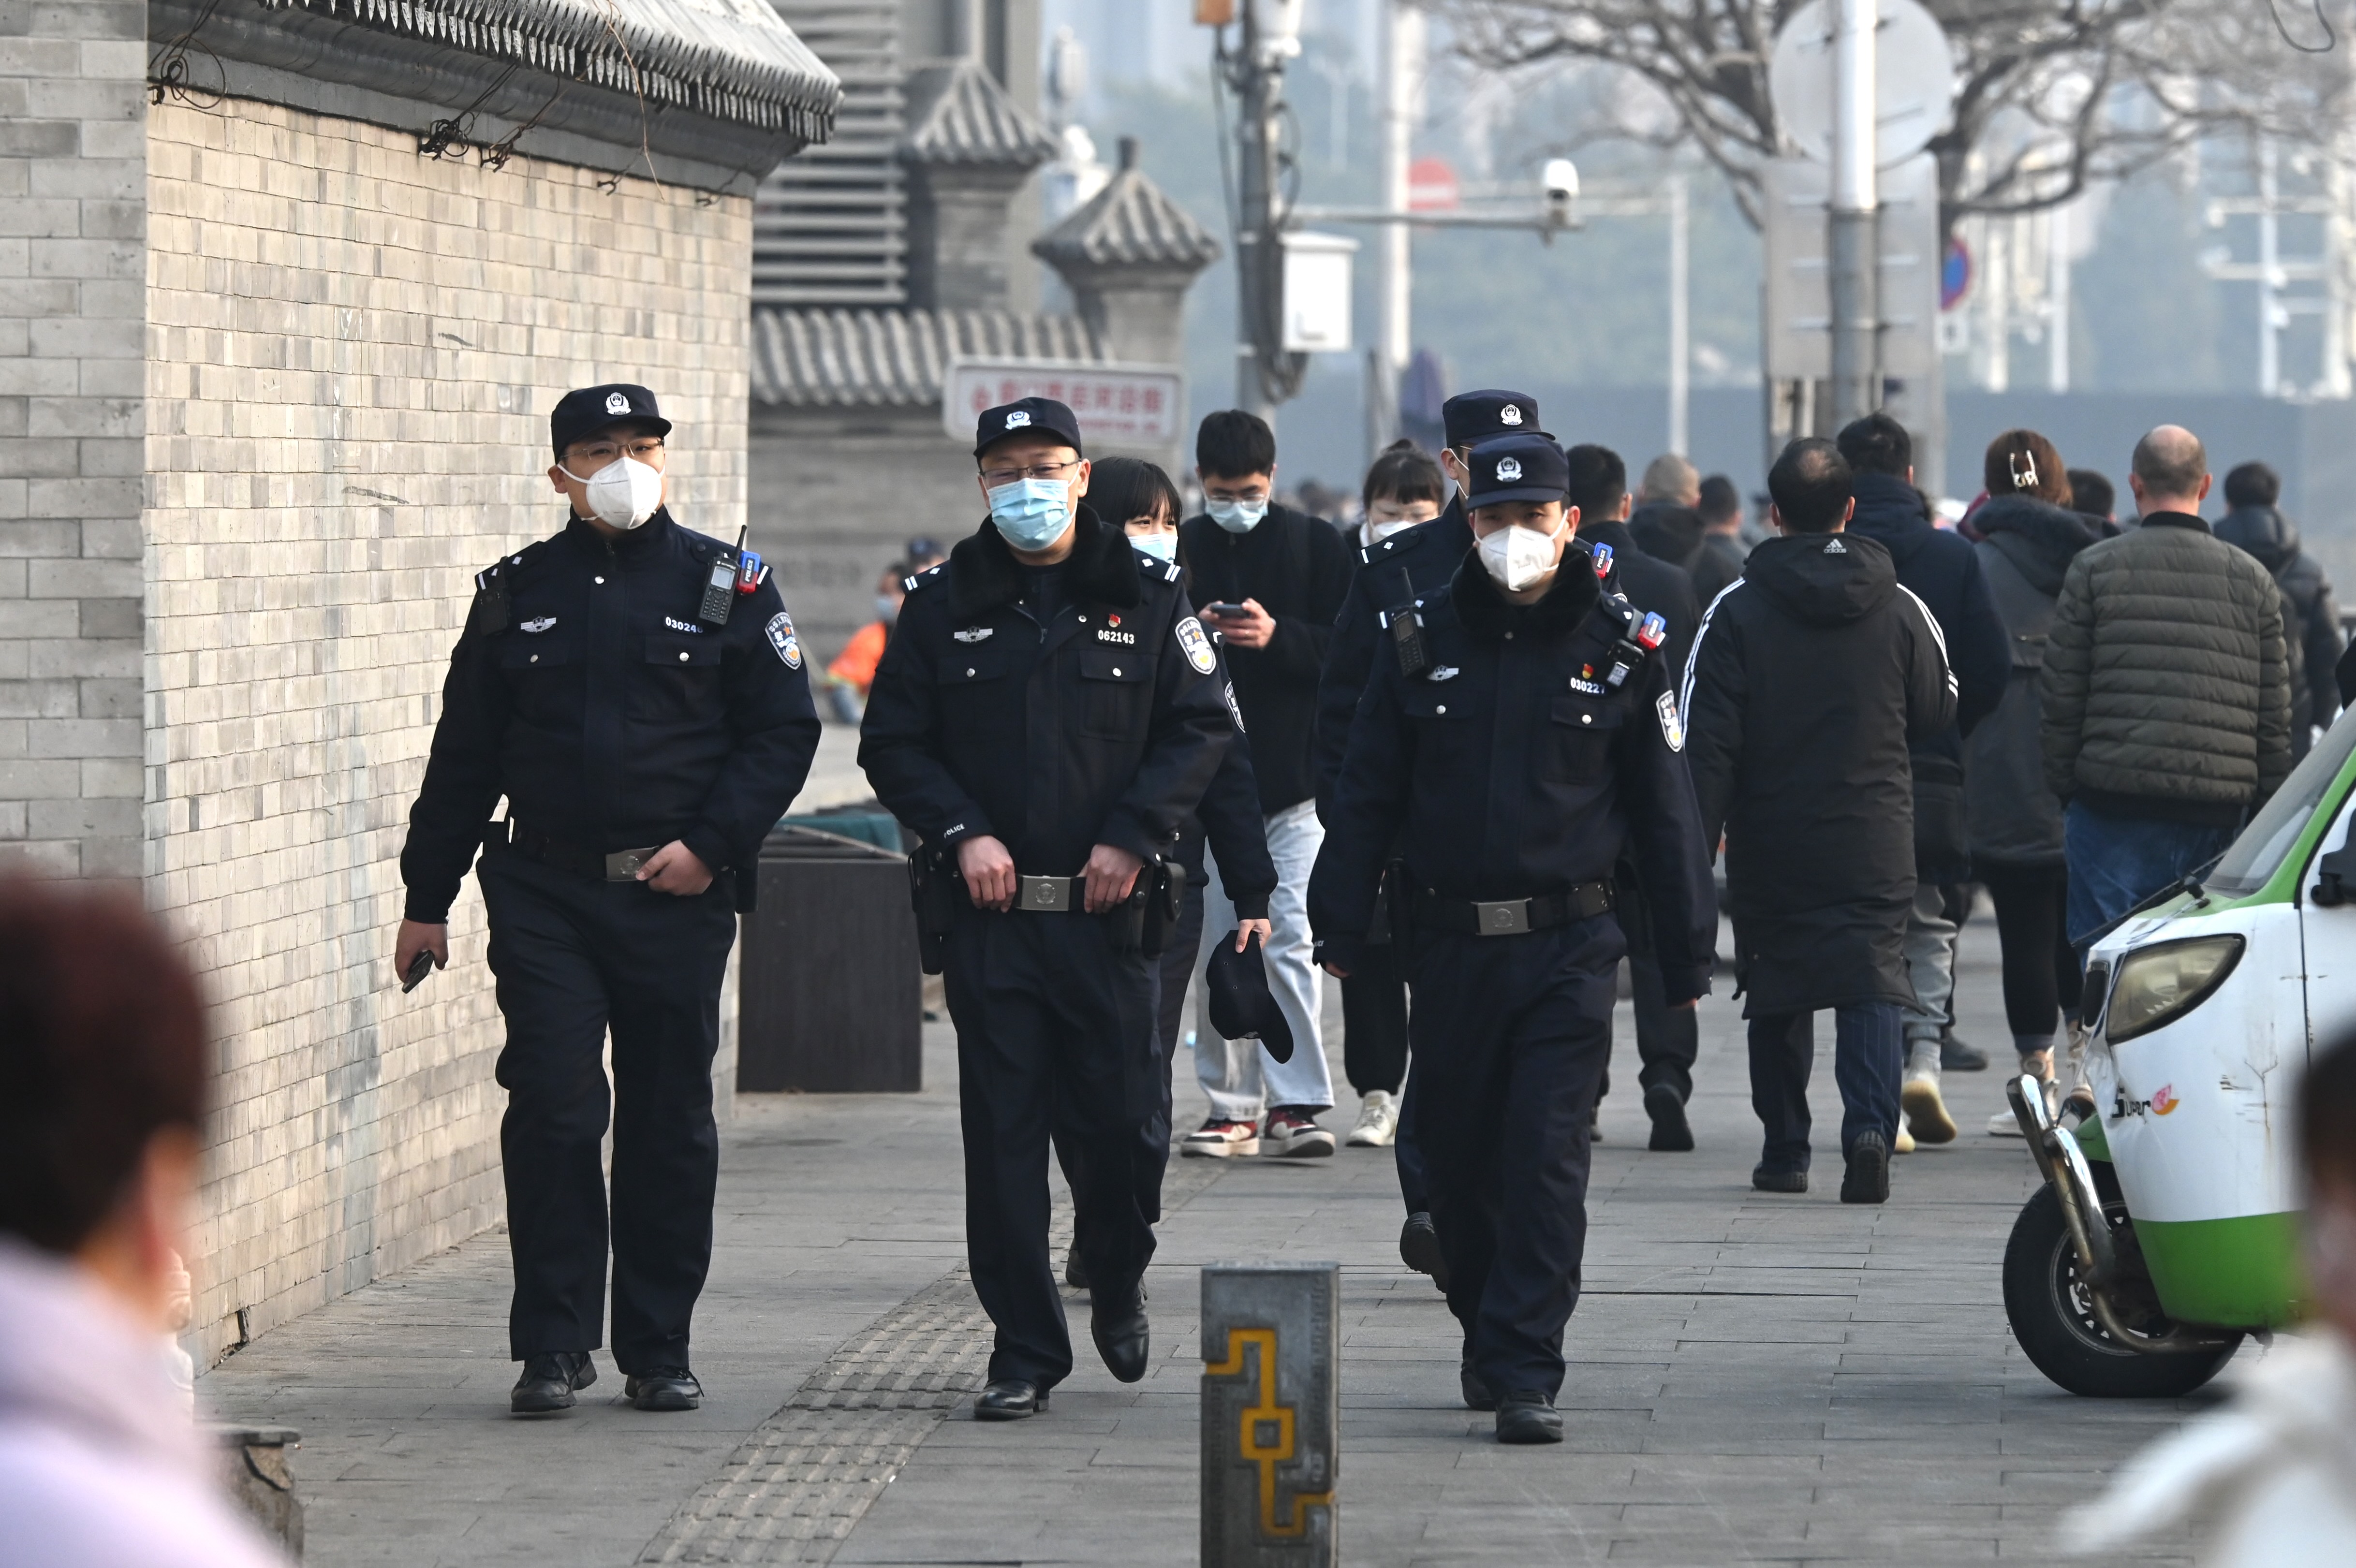 China: Foreign journalists face travel restrictions, harassment - IFJ image